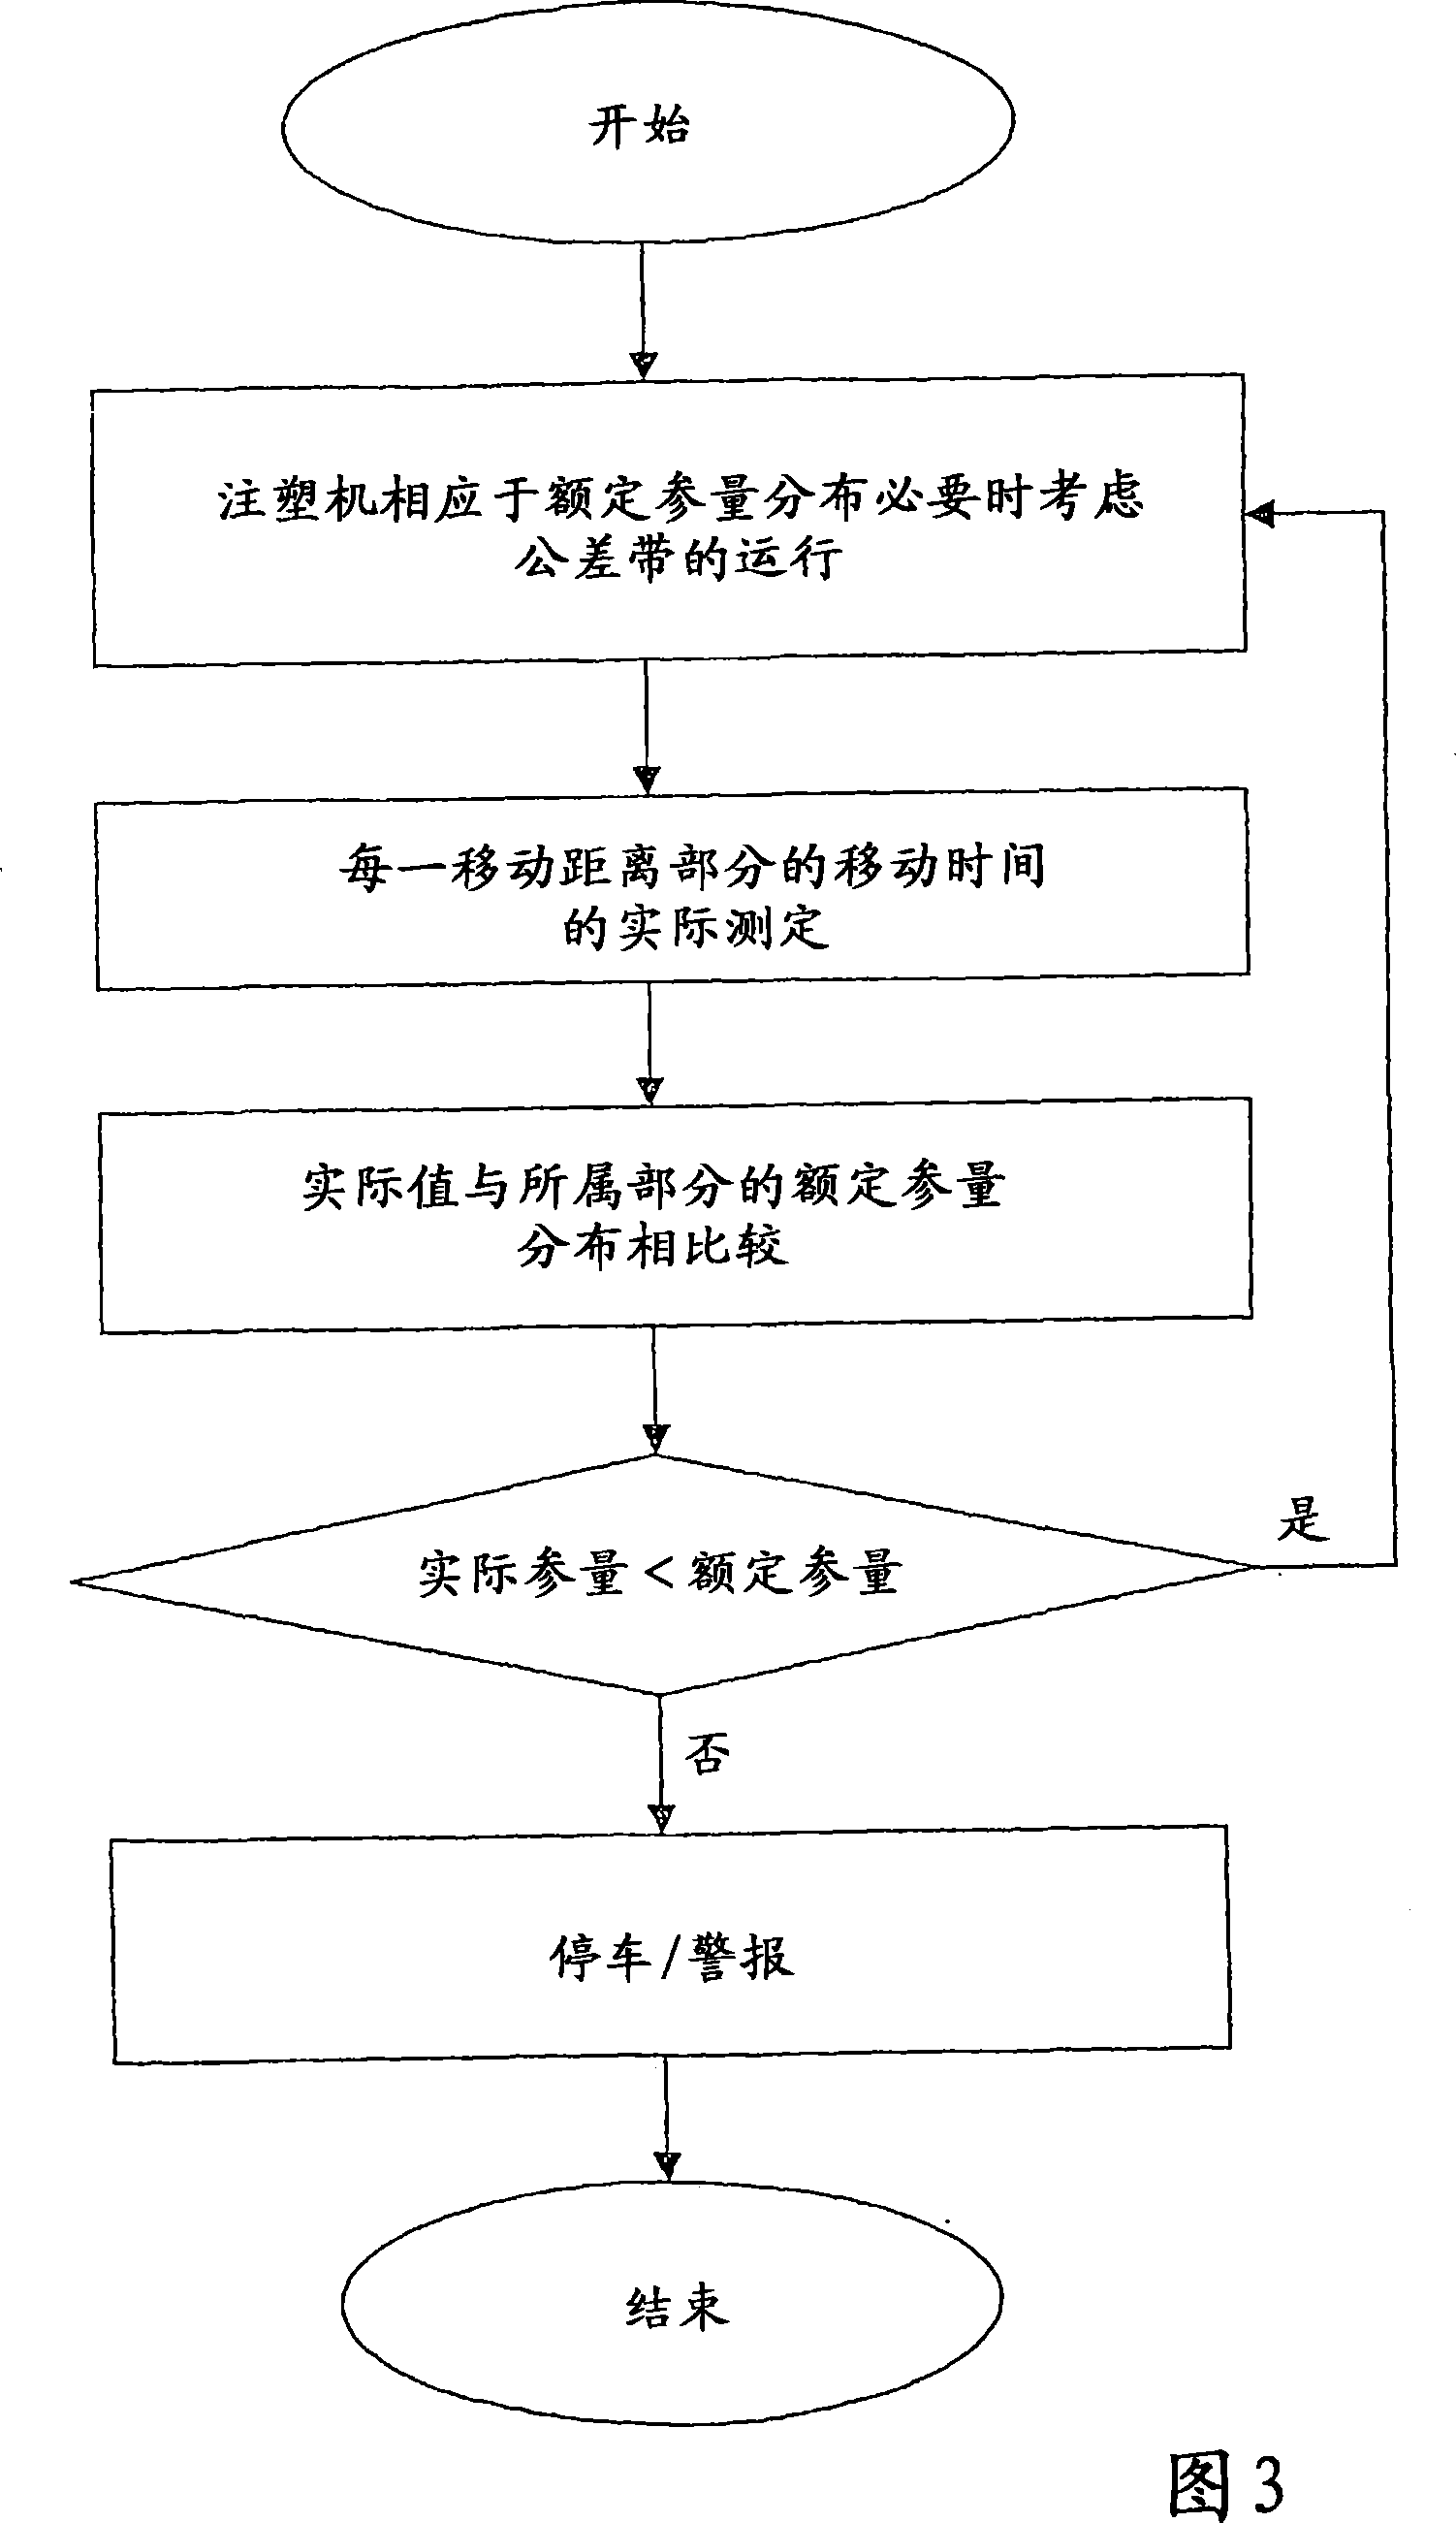 Method for operating an injection molding machine